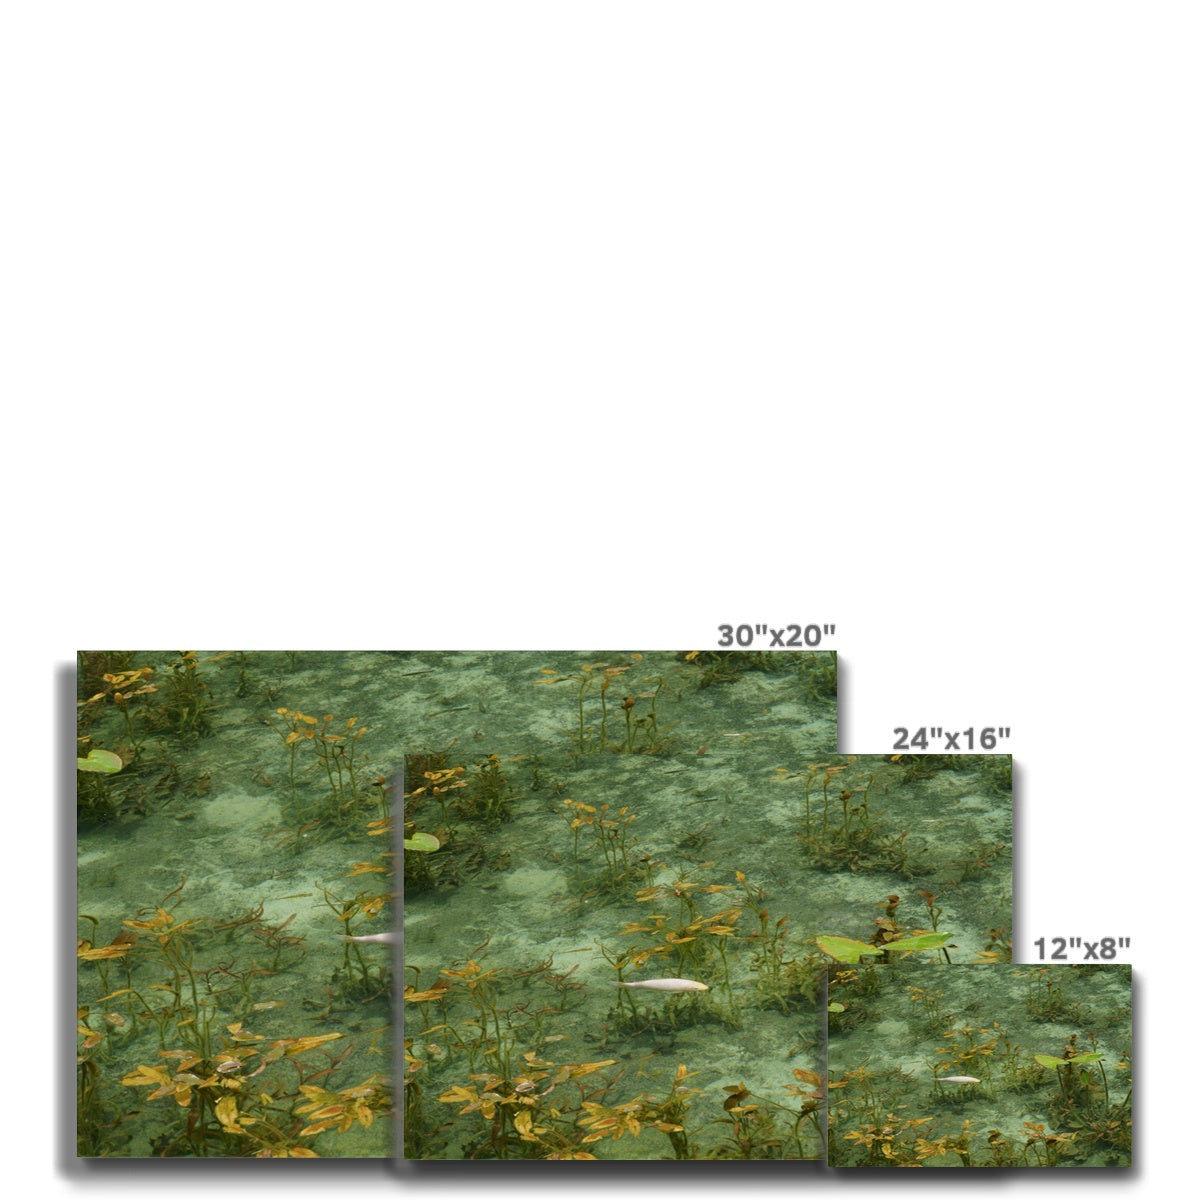 Fish In Water, In Claude Monet Style Canvas